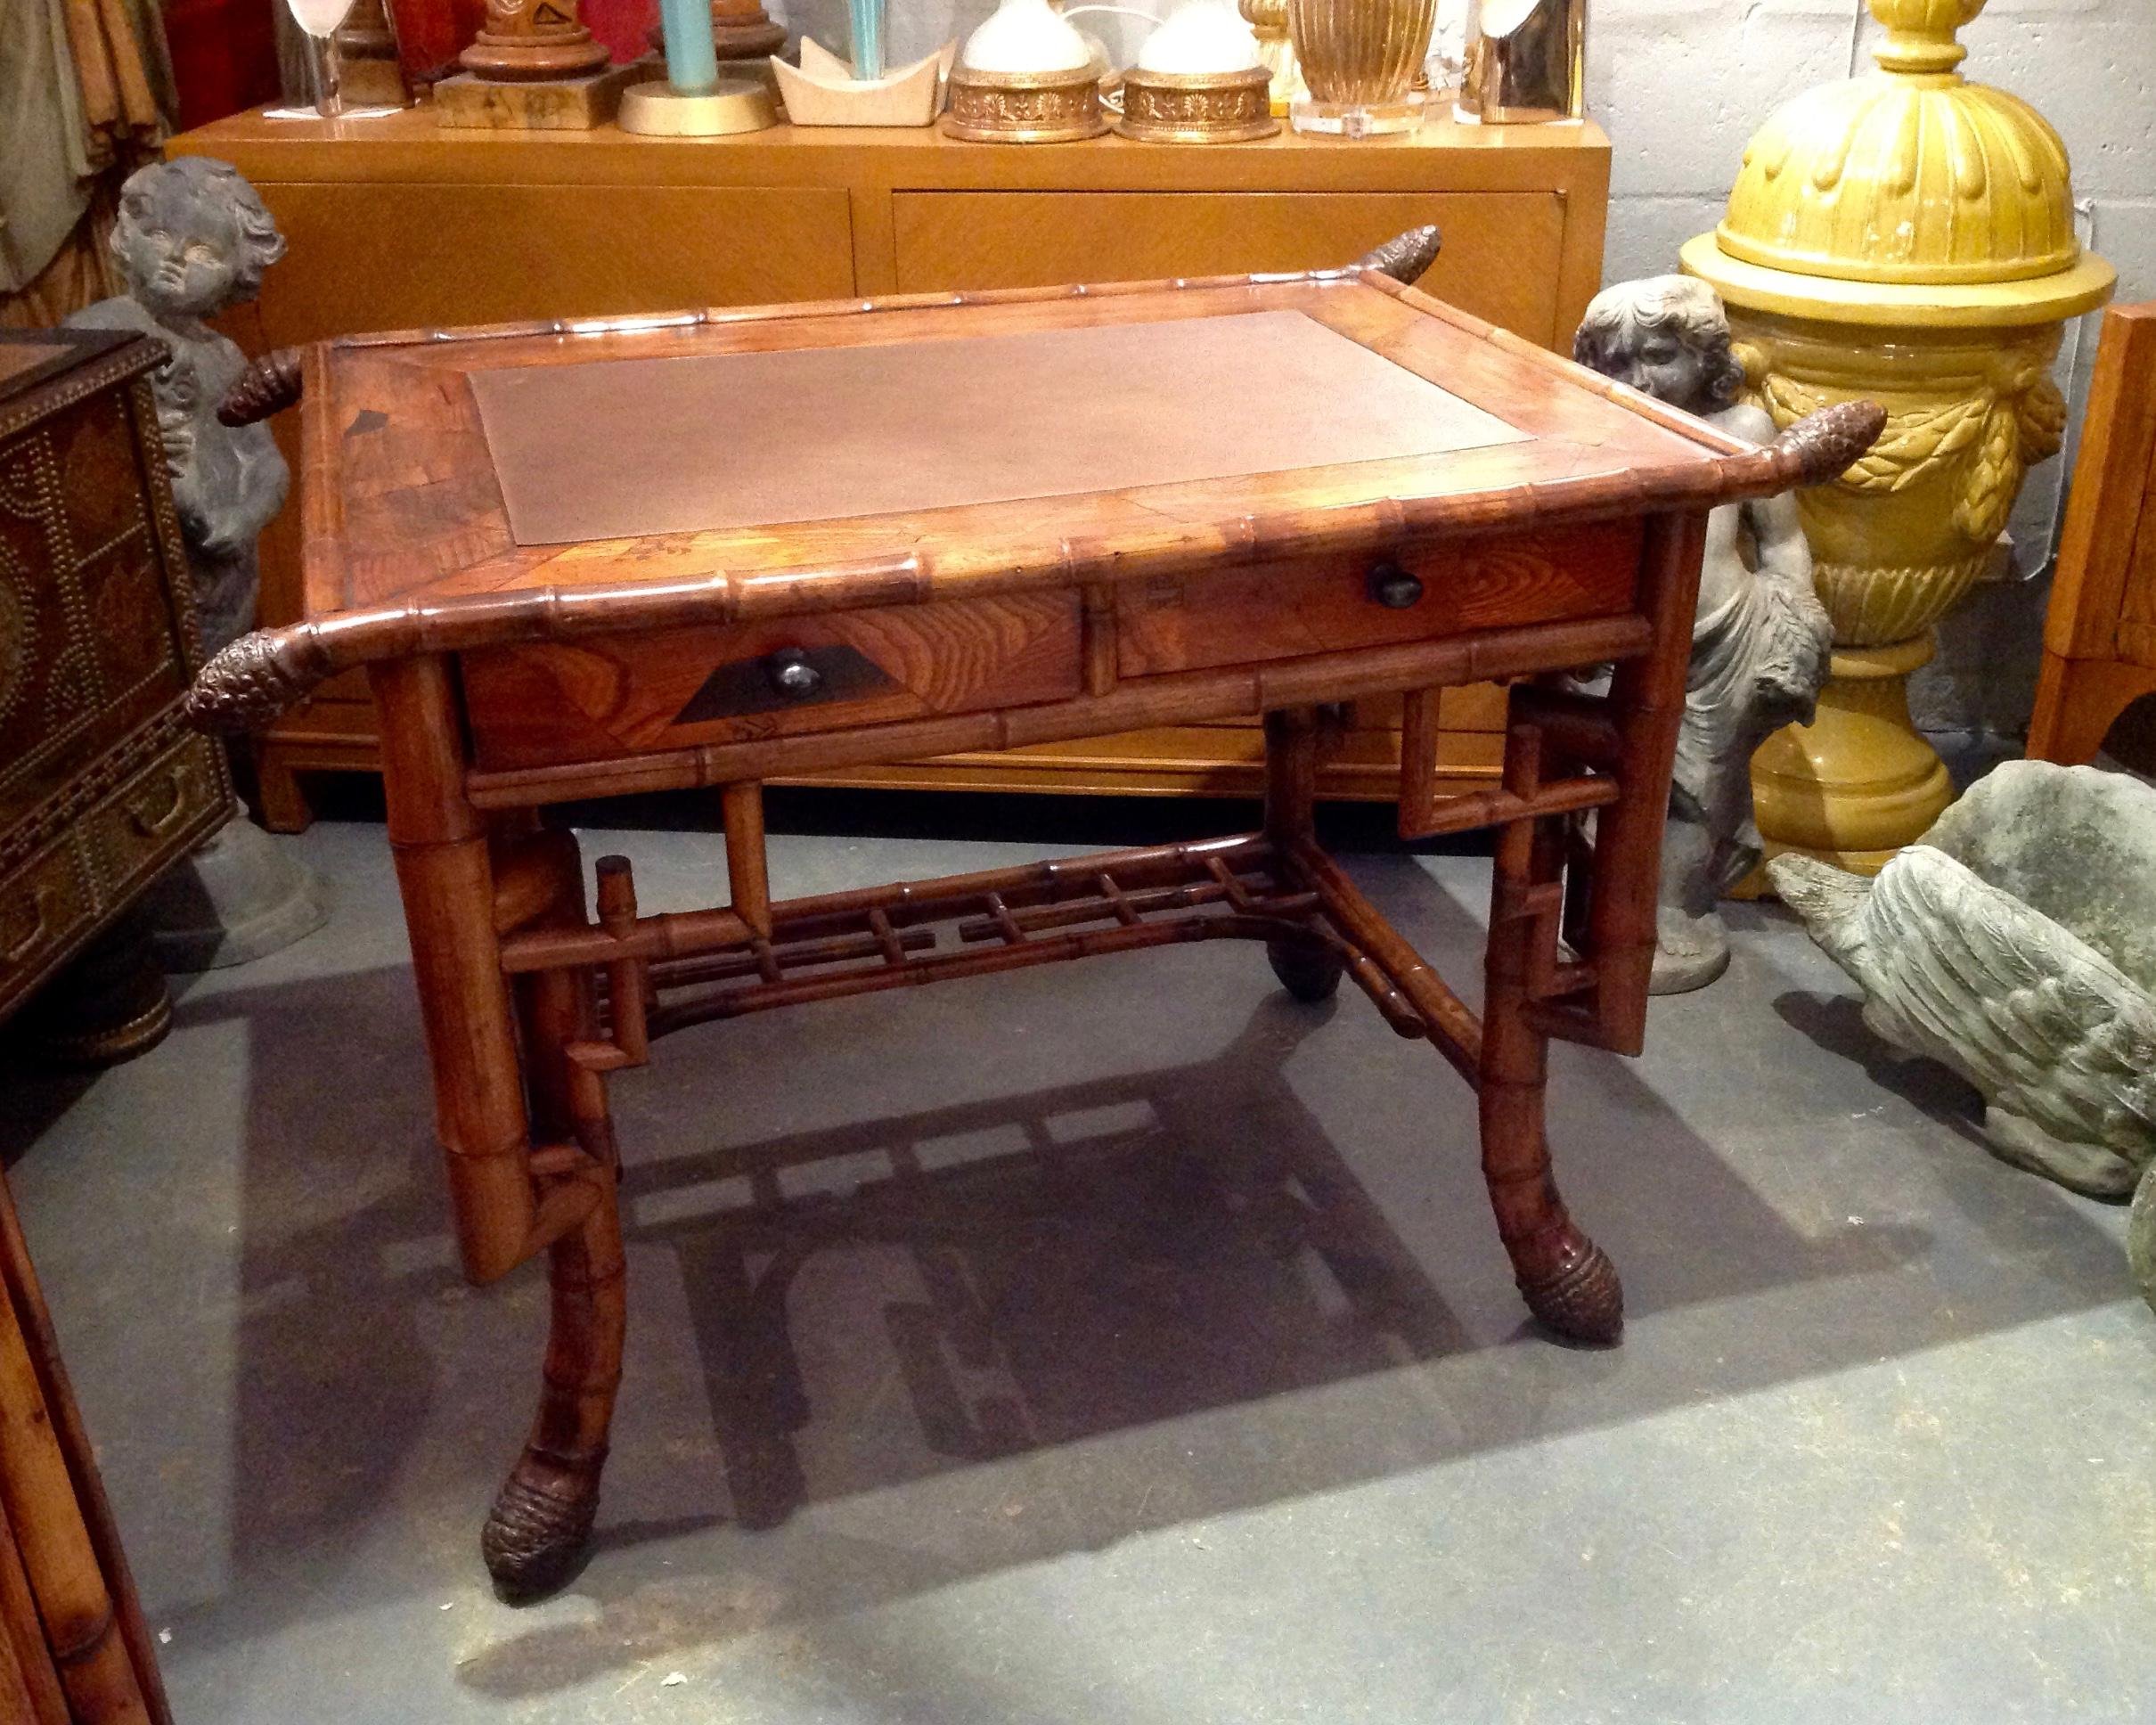 Superb quality and stylized bamboo appointed with inlays and a leather top.
The desk is fashioned with 2 drawers and terminates with massive root feet.
This aesthetic era piece may possibly be one of a kind.